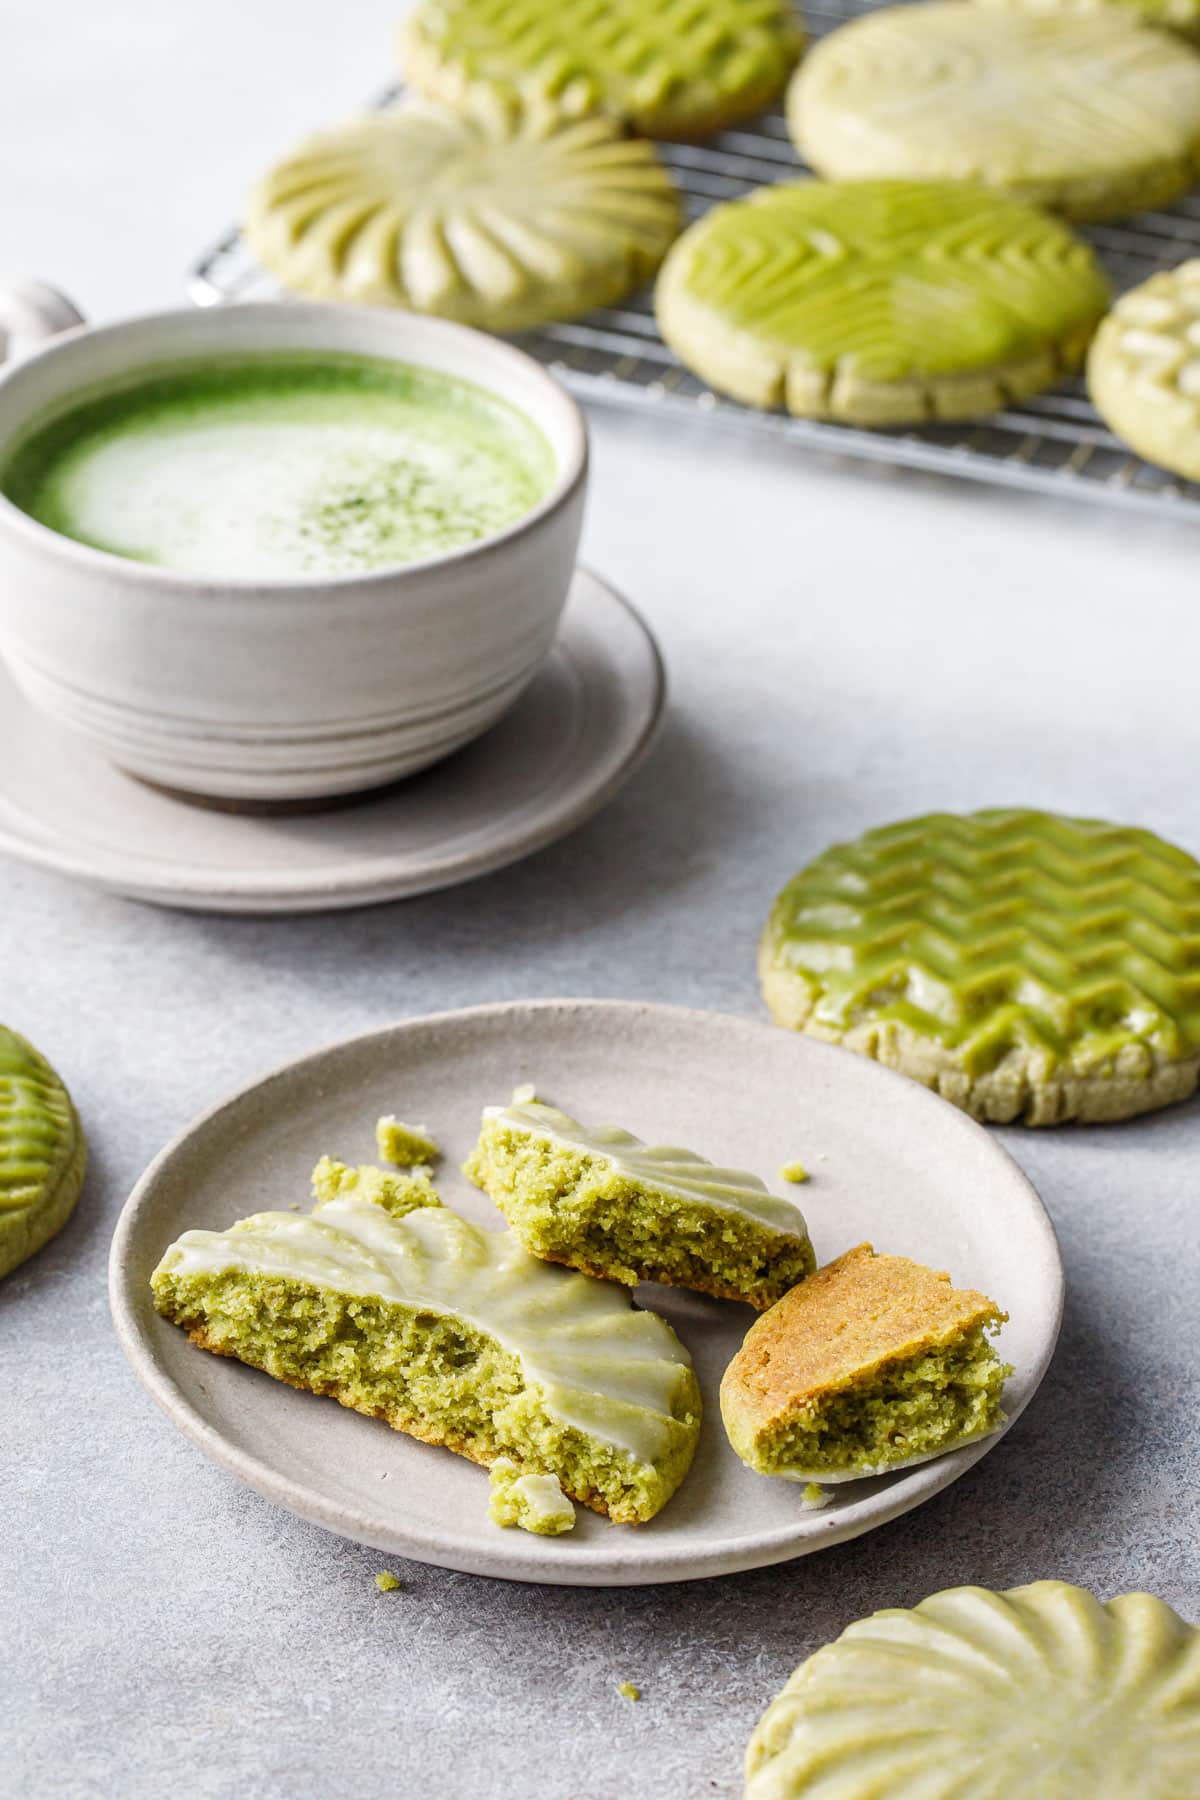 Ceramic plate with a Glazed Matcha Sugar Cookie broken in pieces to show the inner texture, mug of matcha and more cookies in the background.